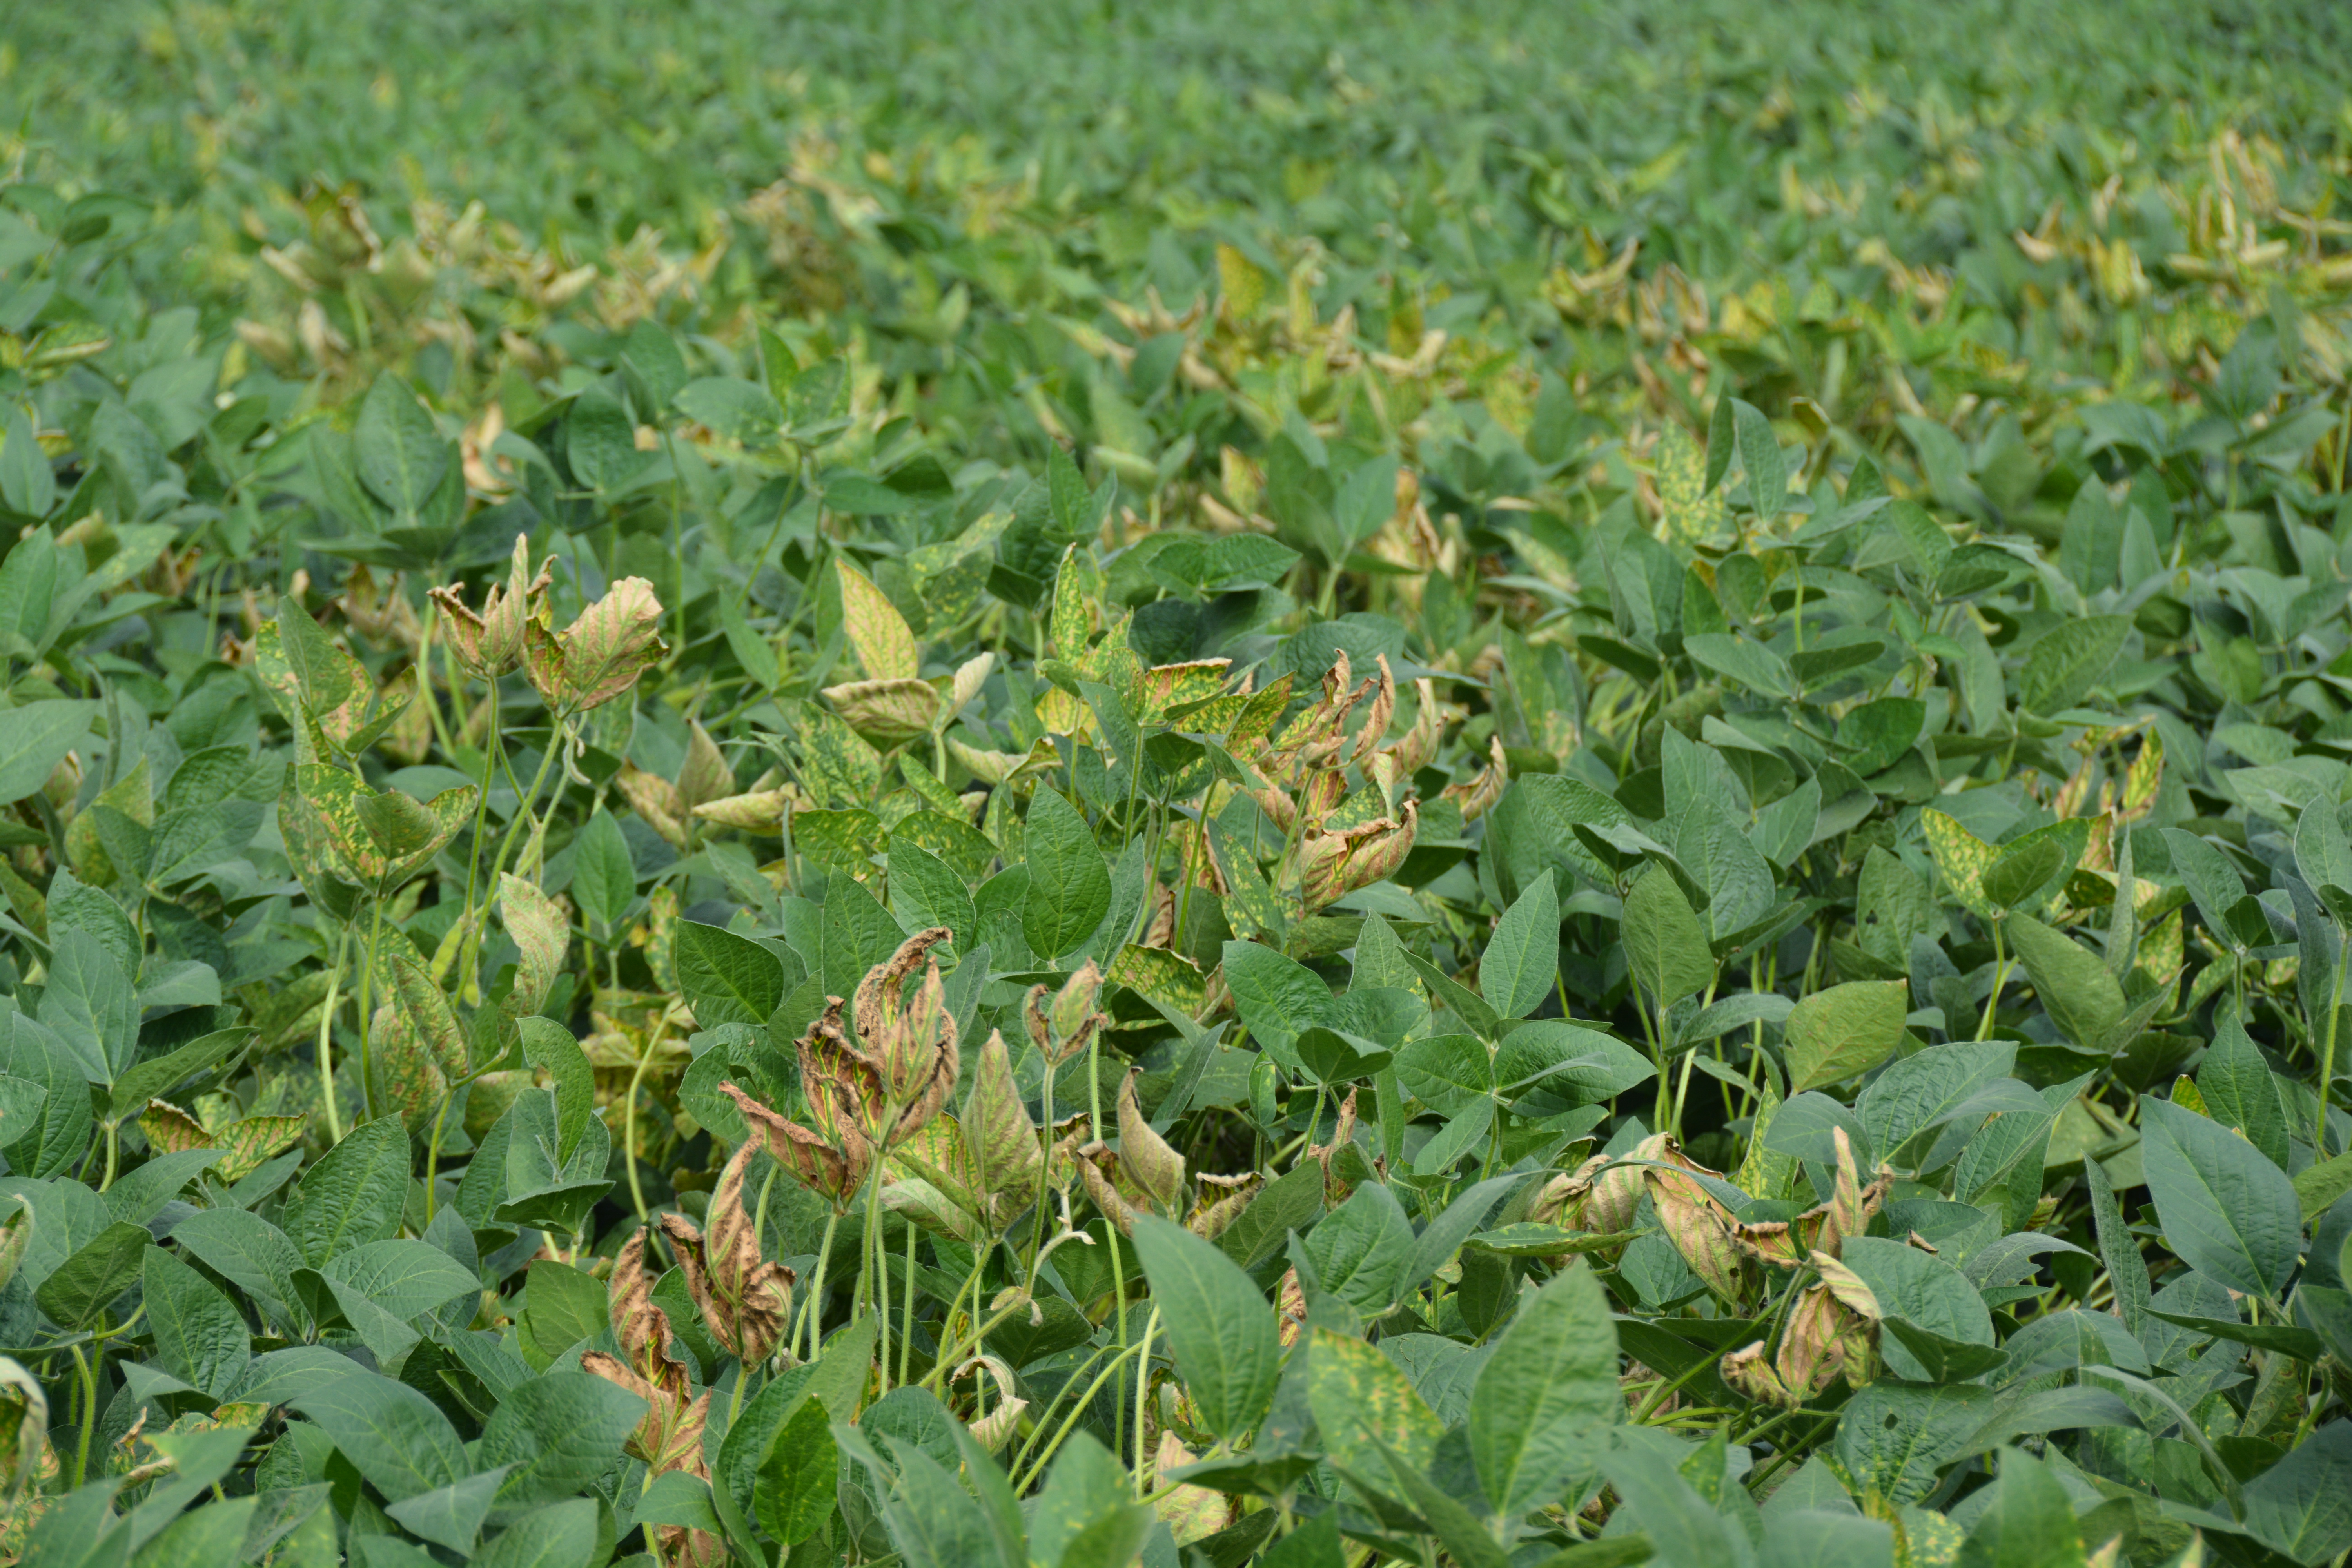 A patch of soybeans with several plants exhibiting browning and yellowing leaves.